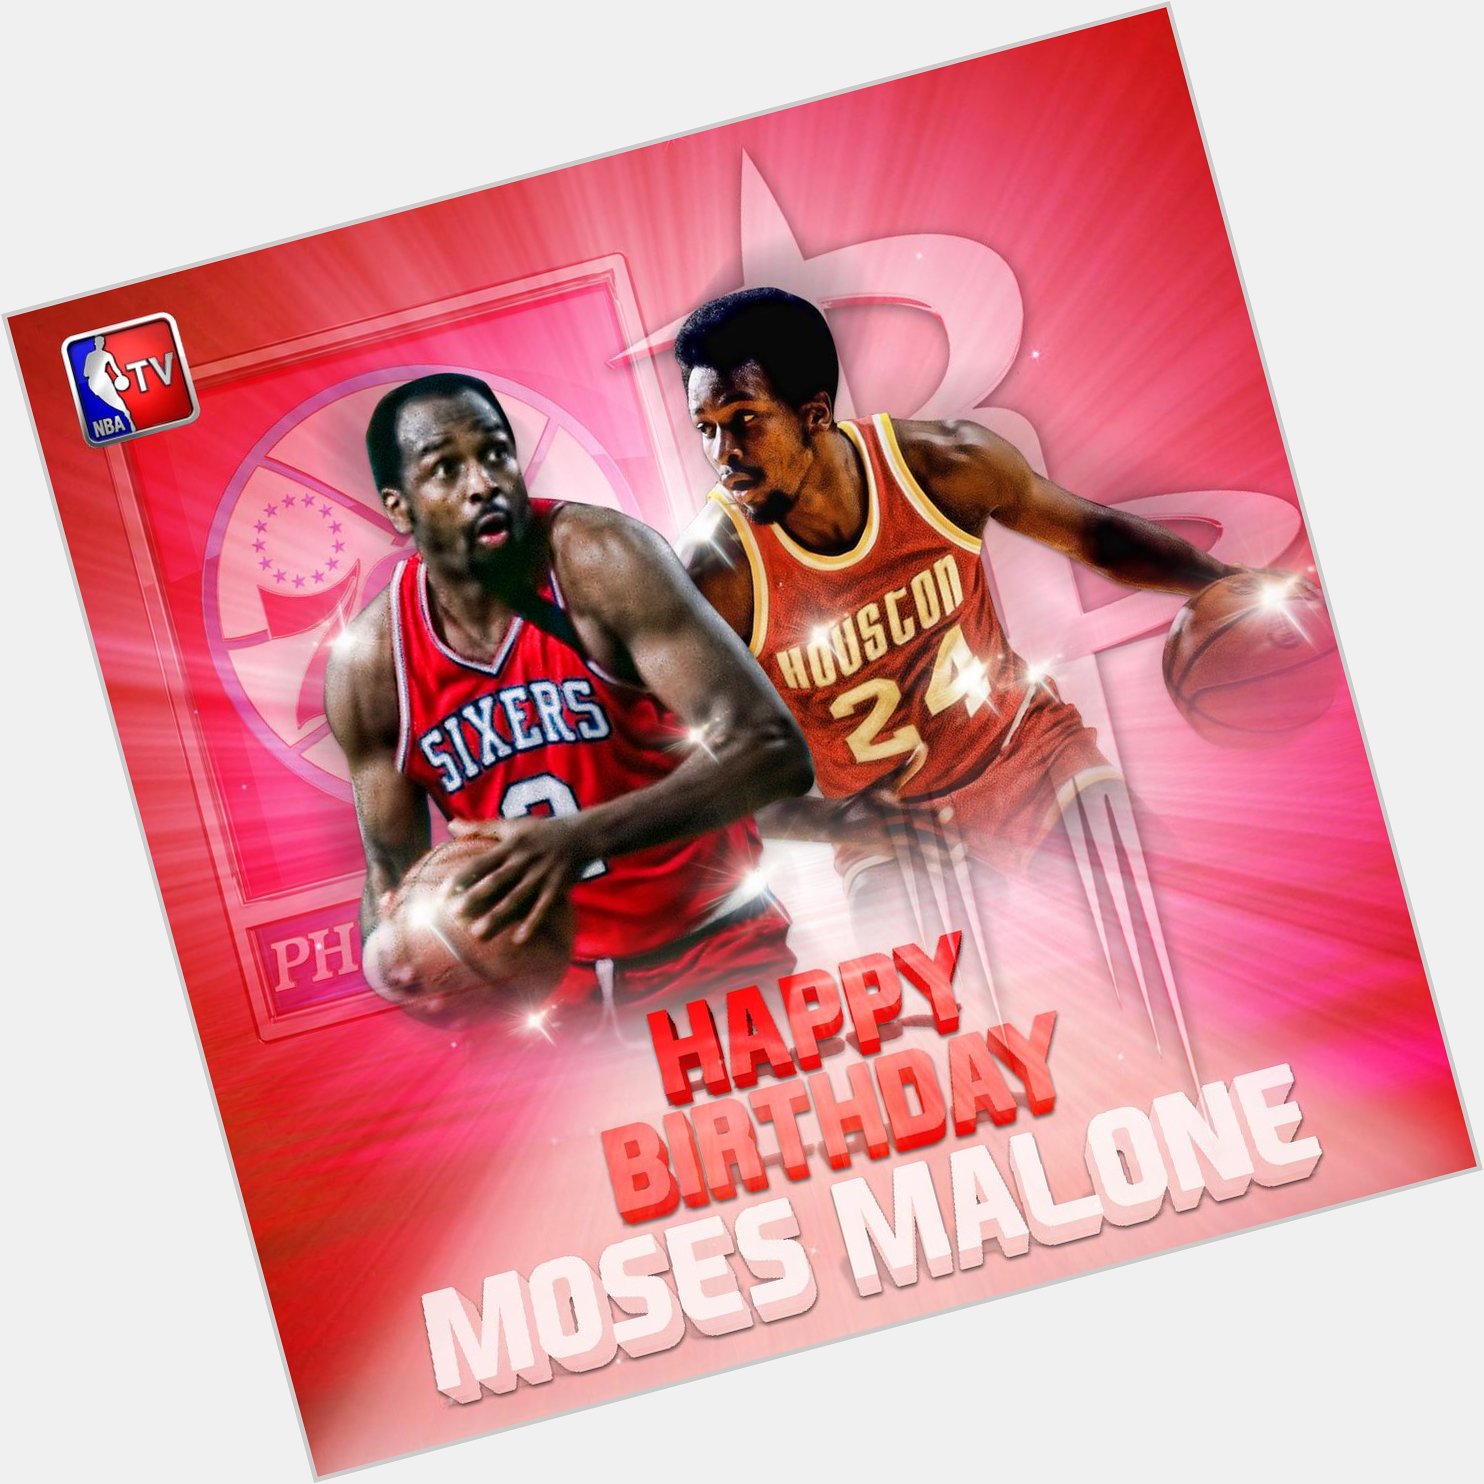 Happy 60th Birthday to NBA legend Moses Malone! 